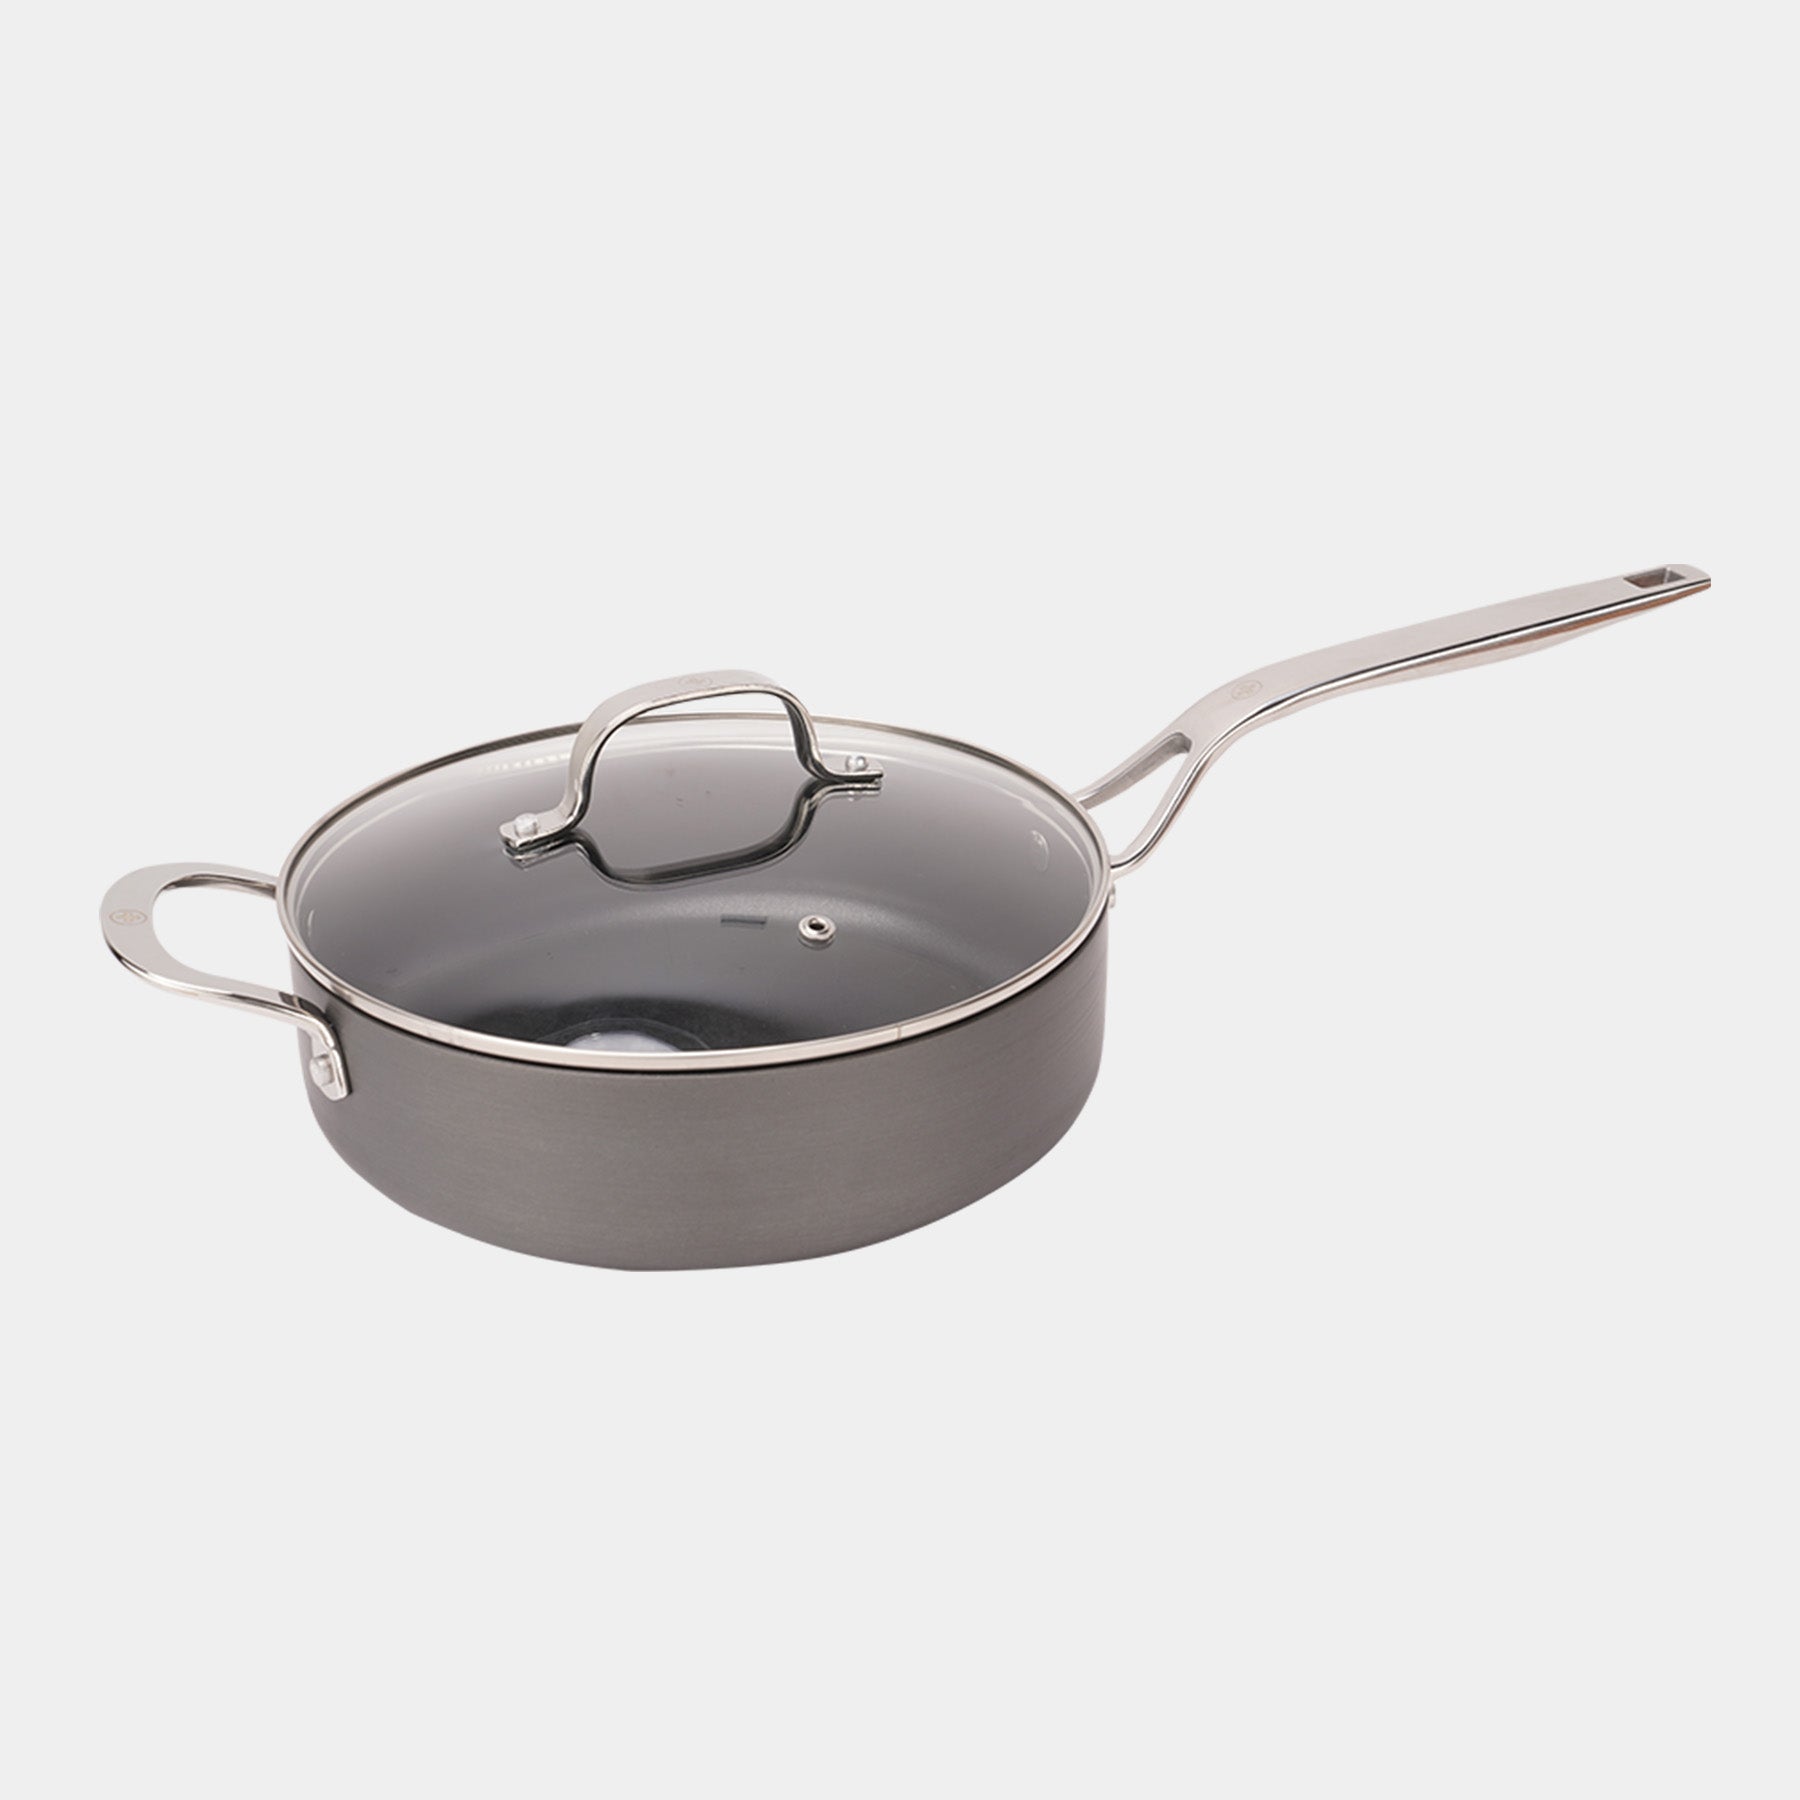 Hard Anodised 4 qt Saute Pan with Glass Lid - Induction